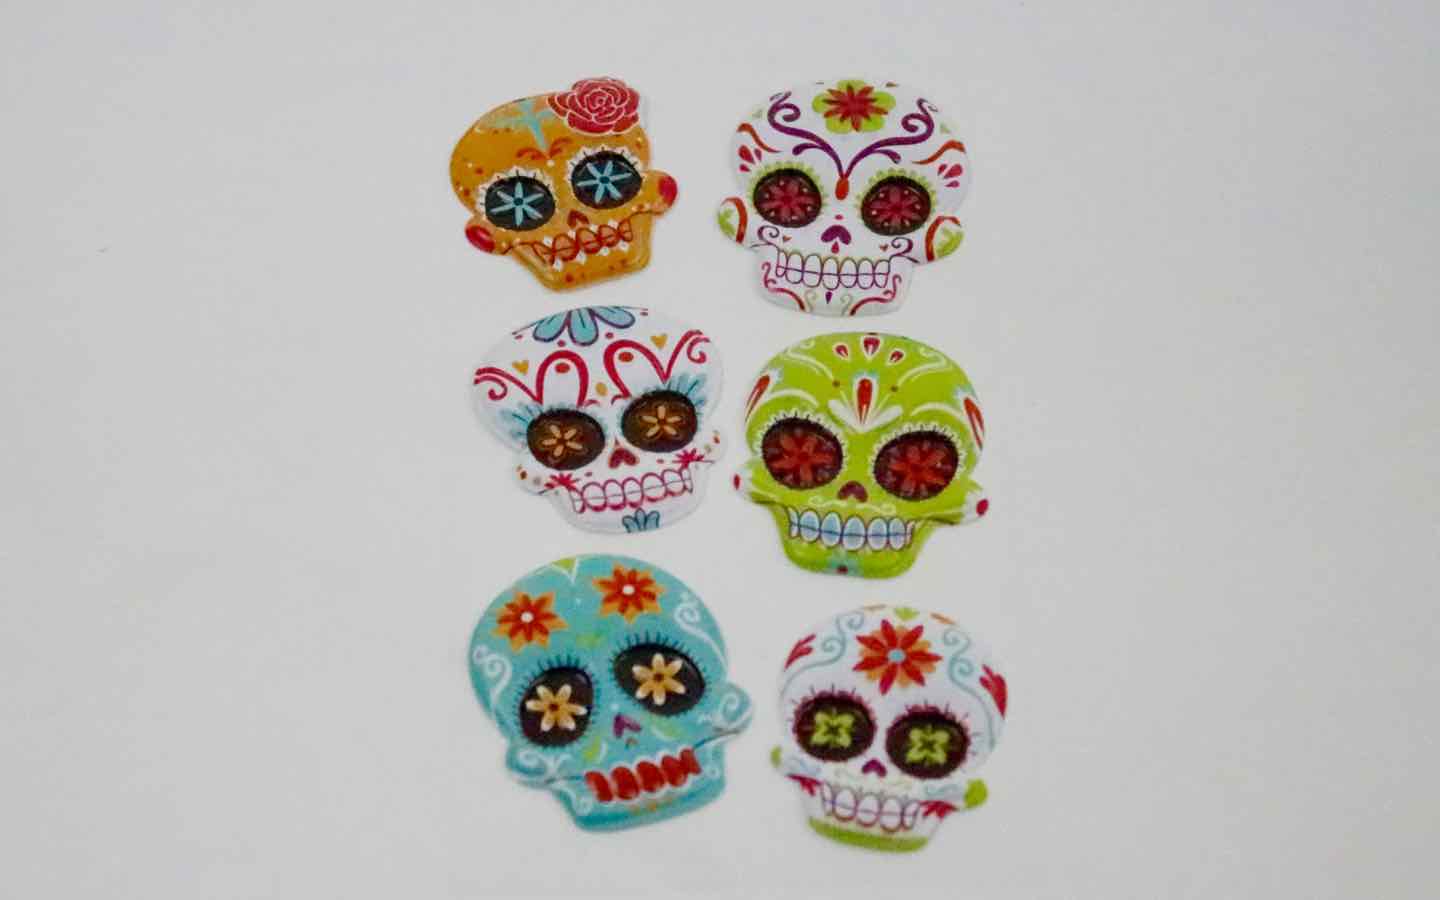 Day of the Dead Battery Light Project!